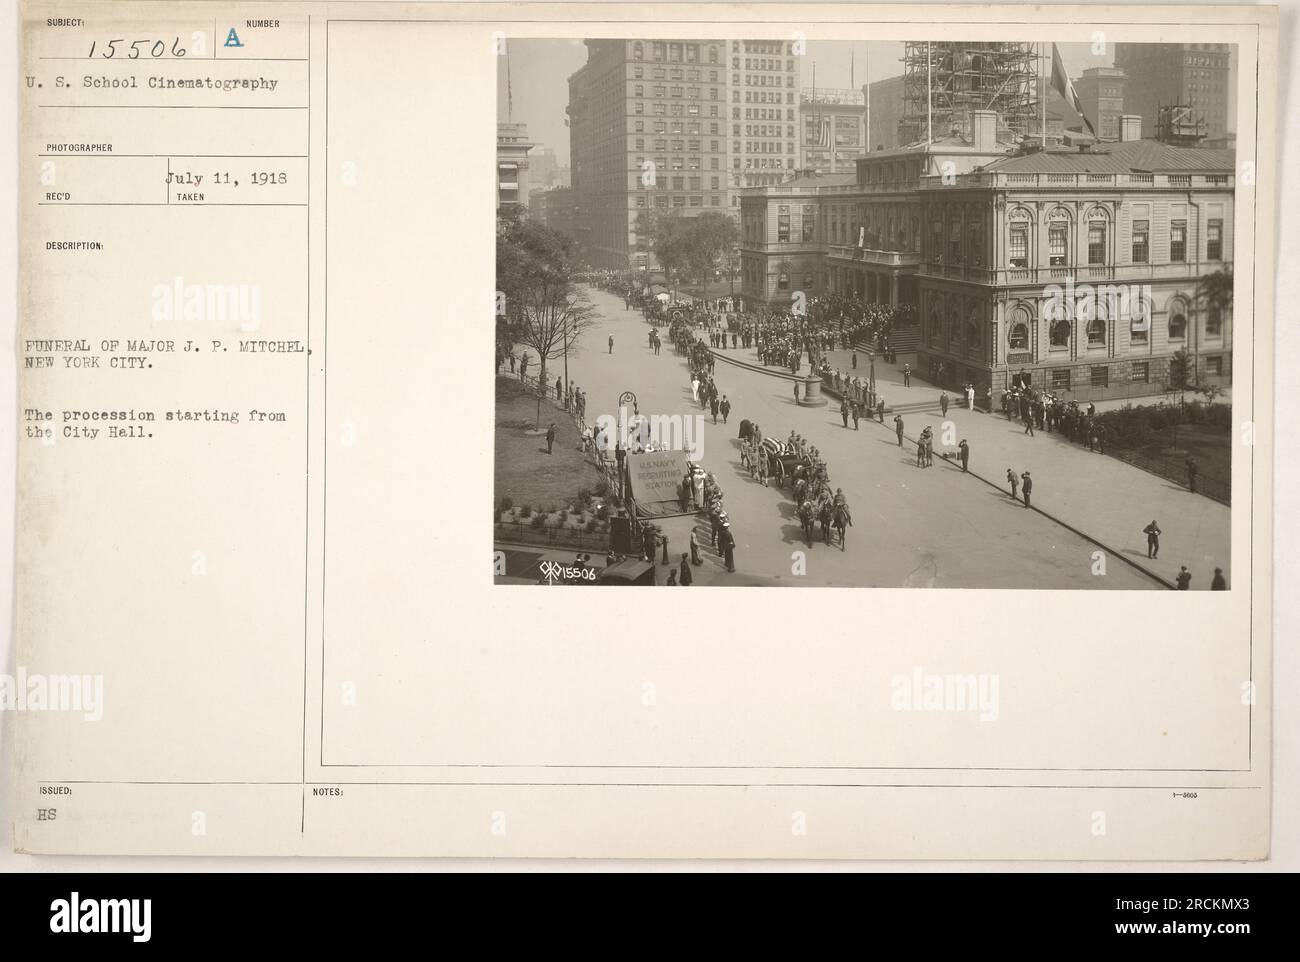 Caption: "The funeral procession of Major J.P. Mitchel takes place in New York City. The procession starts from City Hall as seen in this photograph taken during World War One. The photo is part of the U.S. School Cinematography collection." Stock Photo